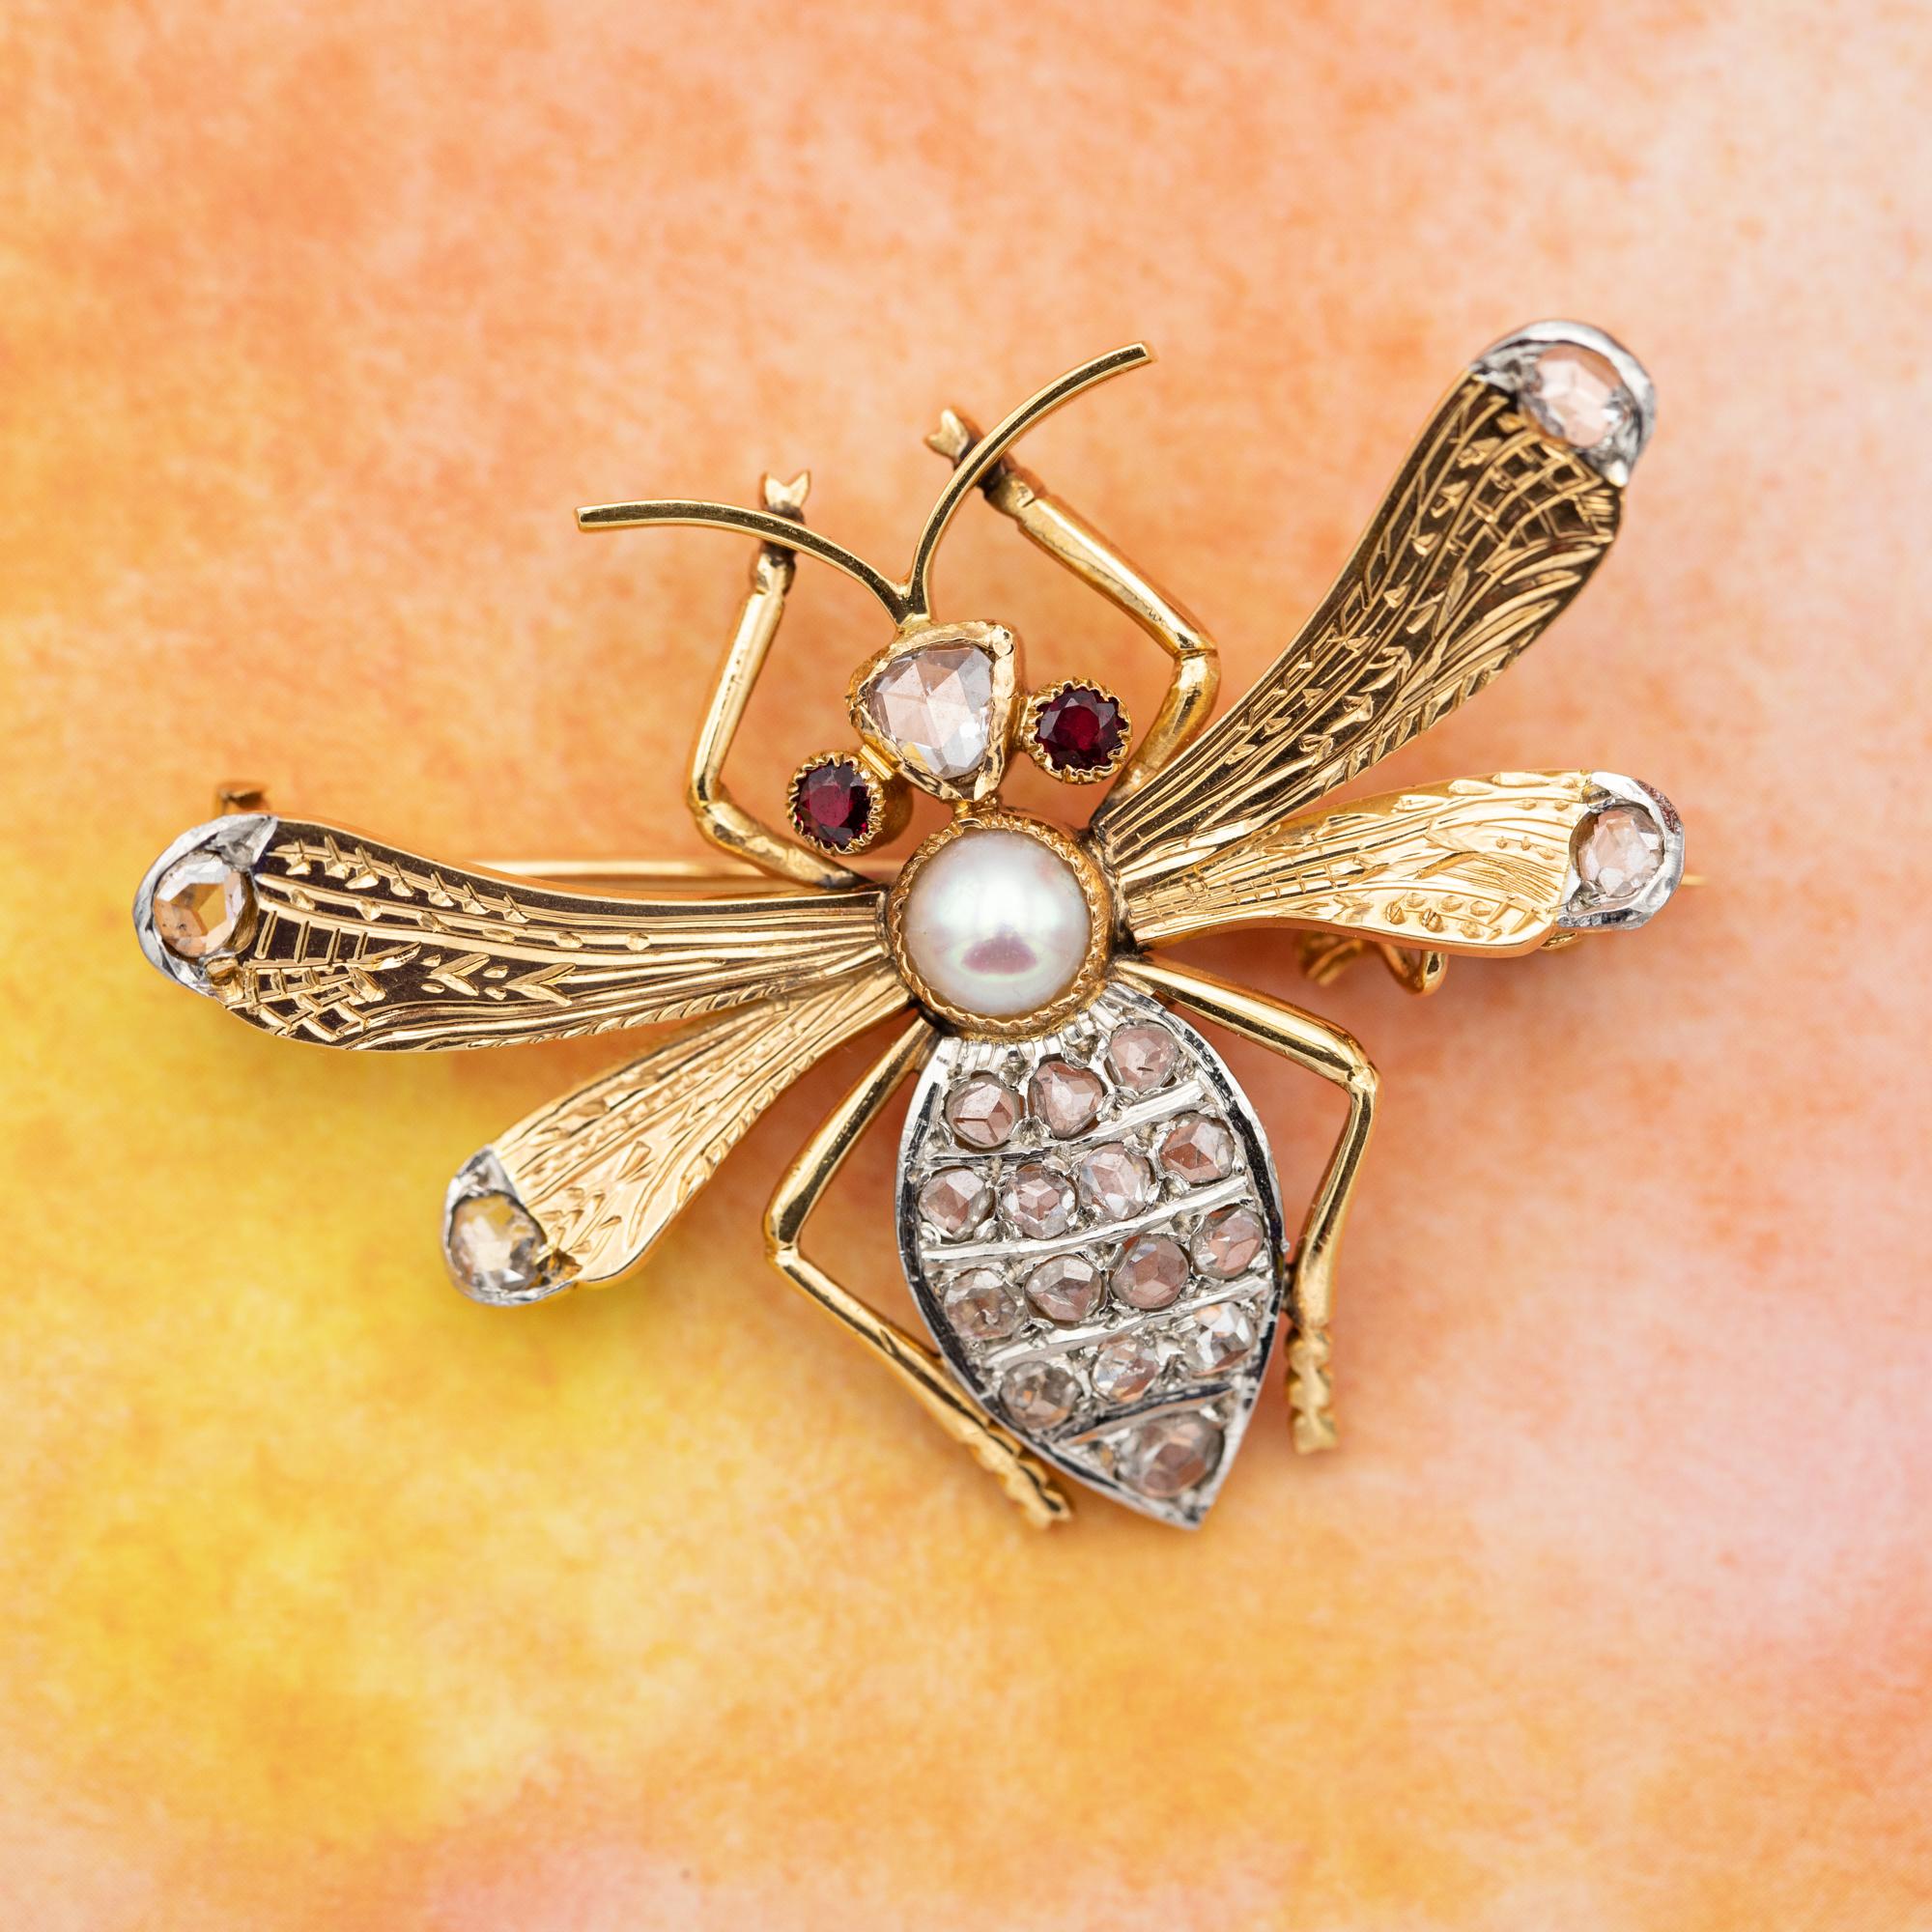 Rare Victorian brooch - 18 K Yellow gold Queen Bee set with rose cut diamond For Sale 4